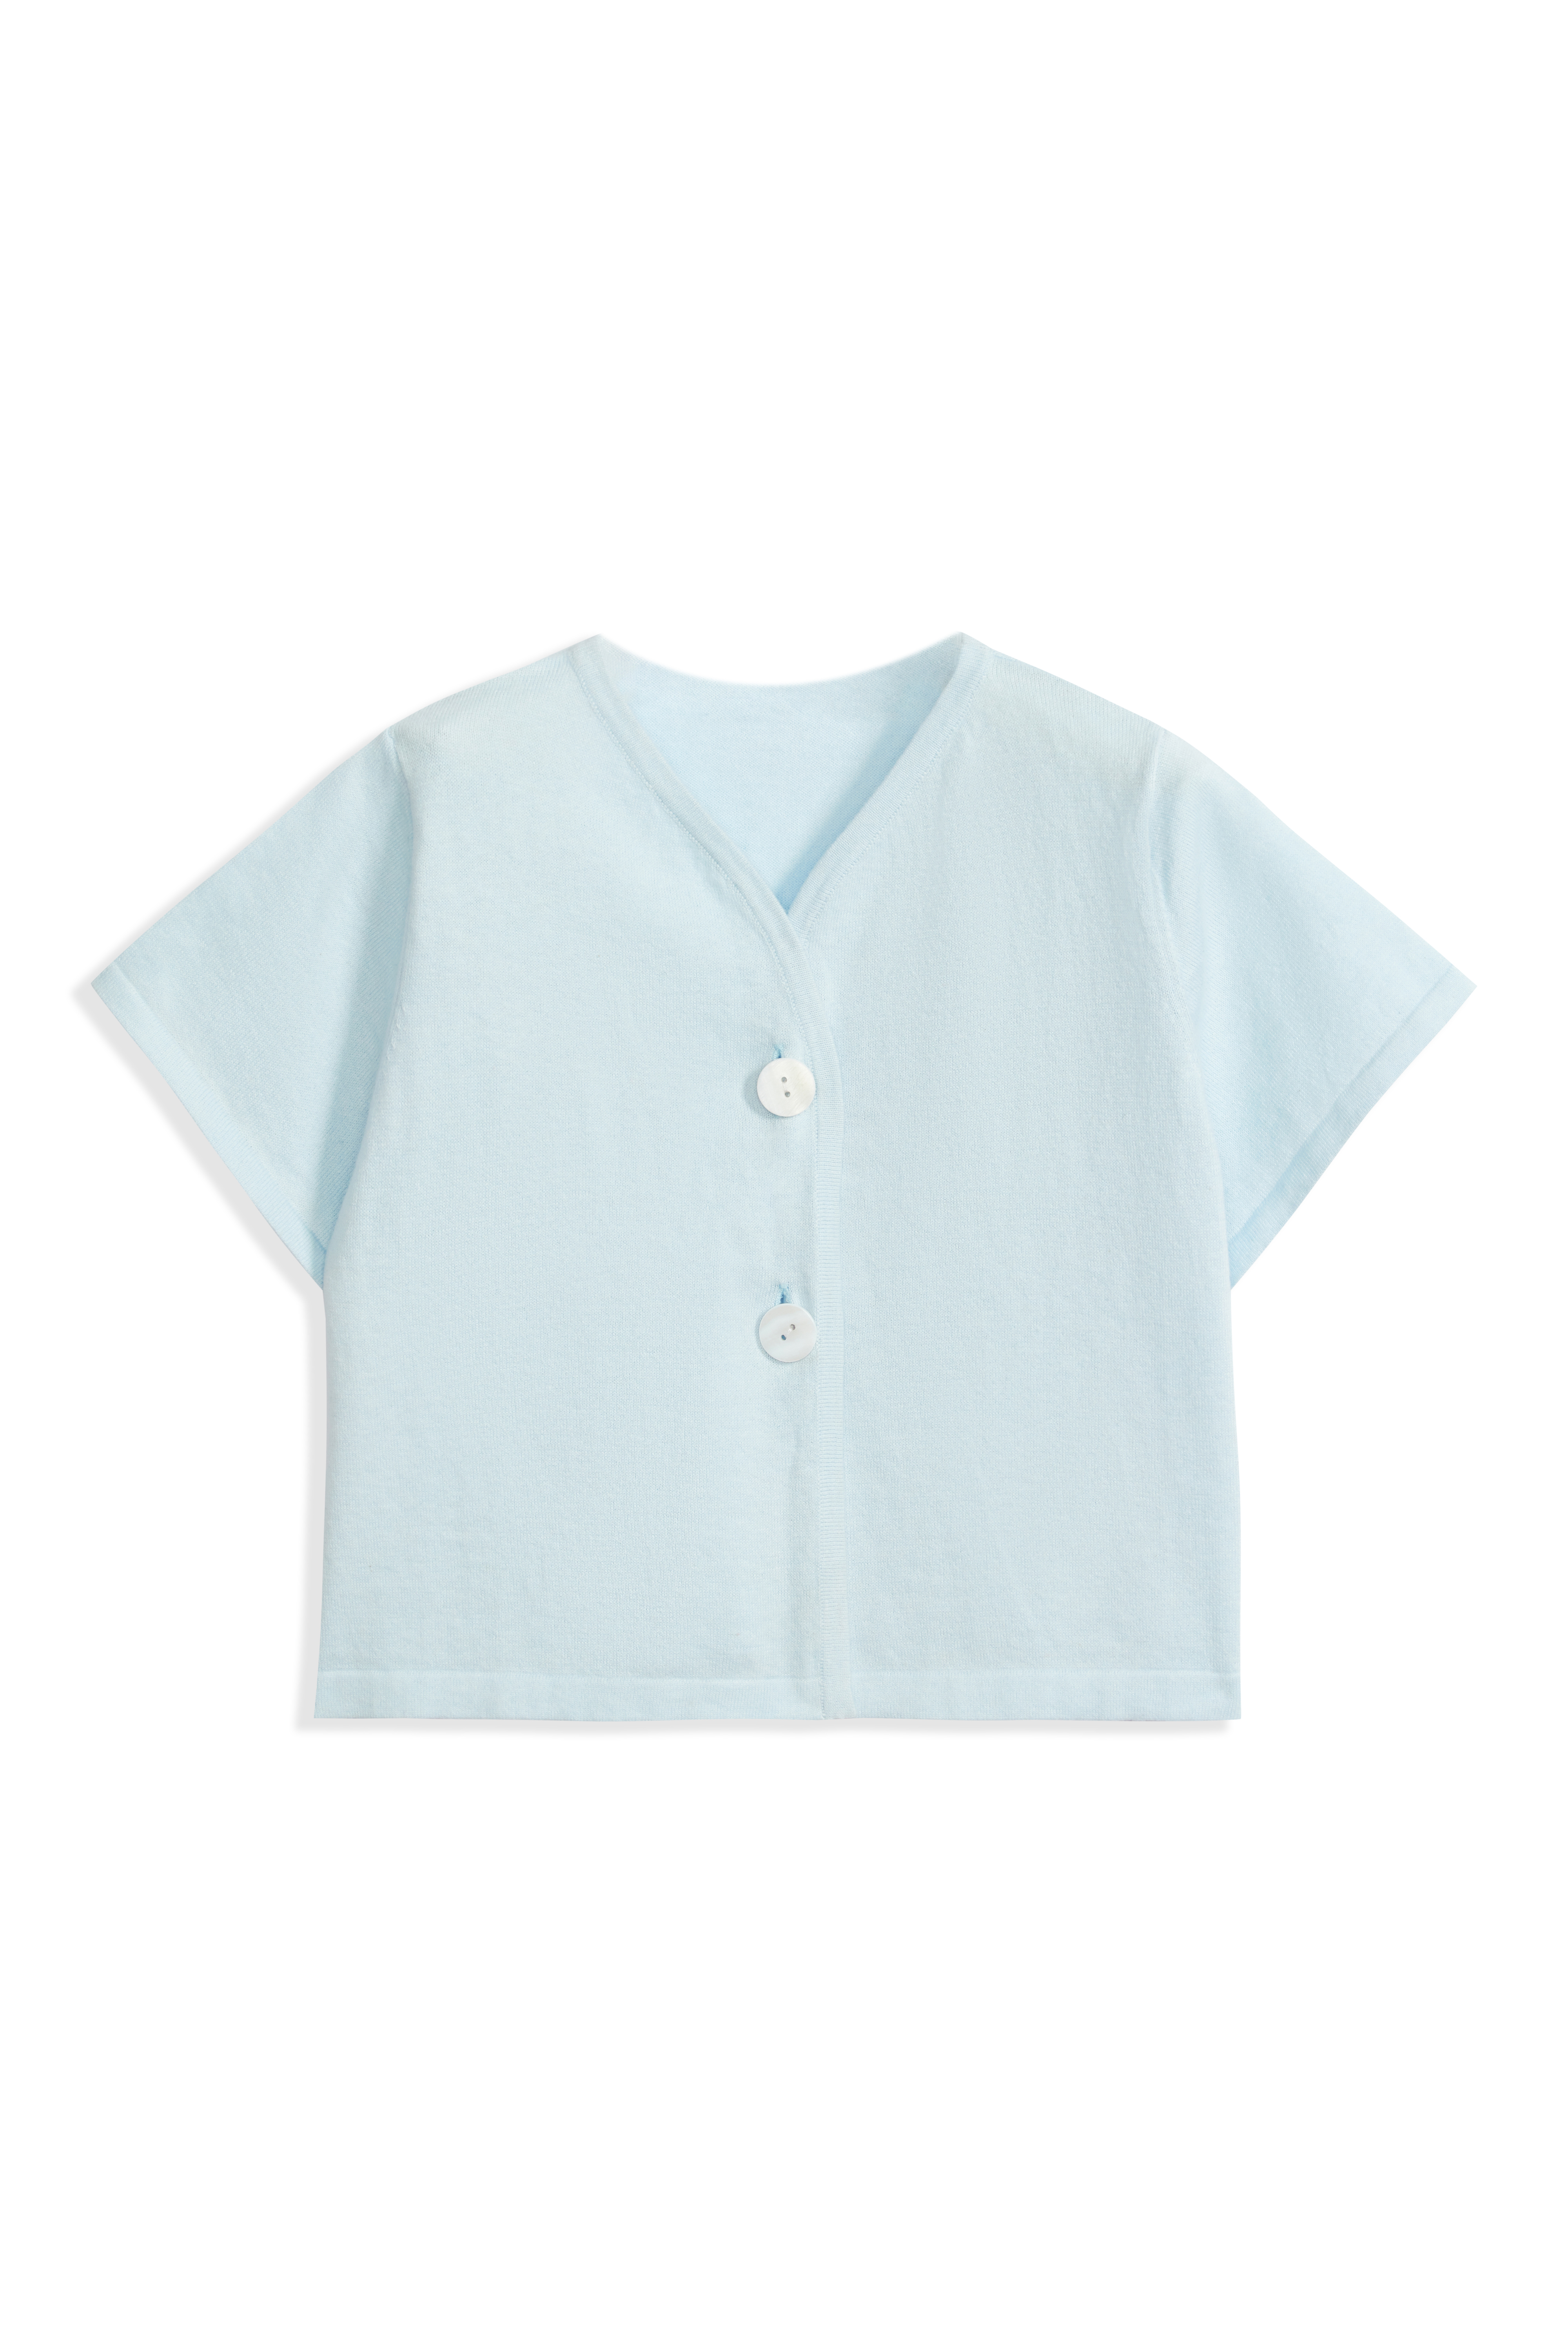 KID'S CARDIGAN SHORTSLEEVE WITH TWO BUTTONS